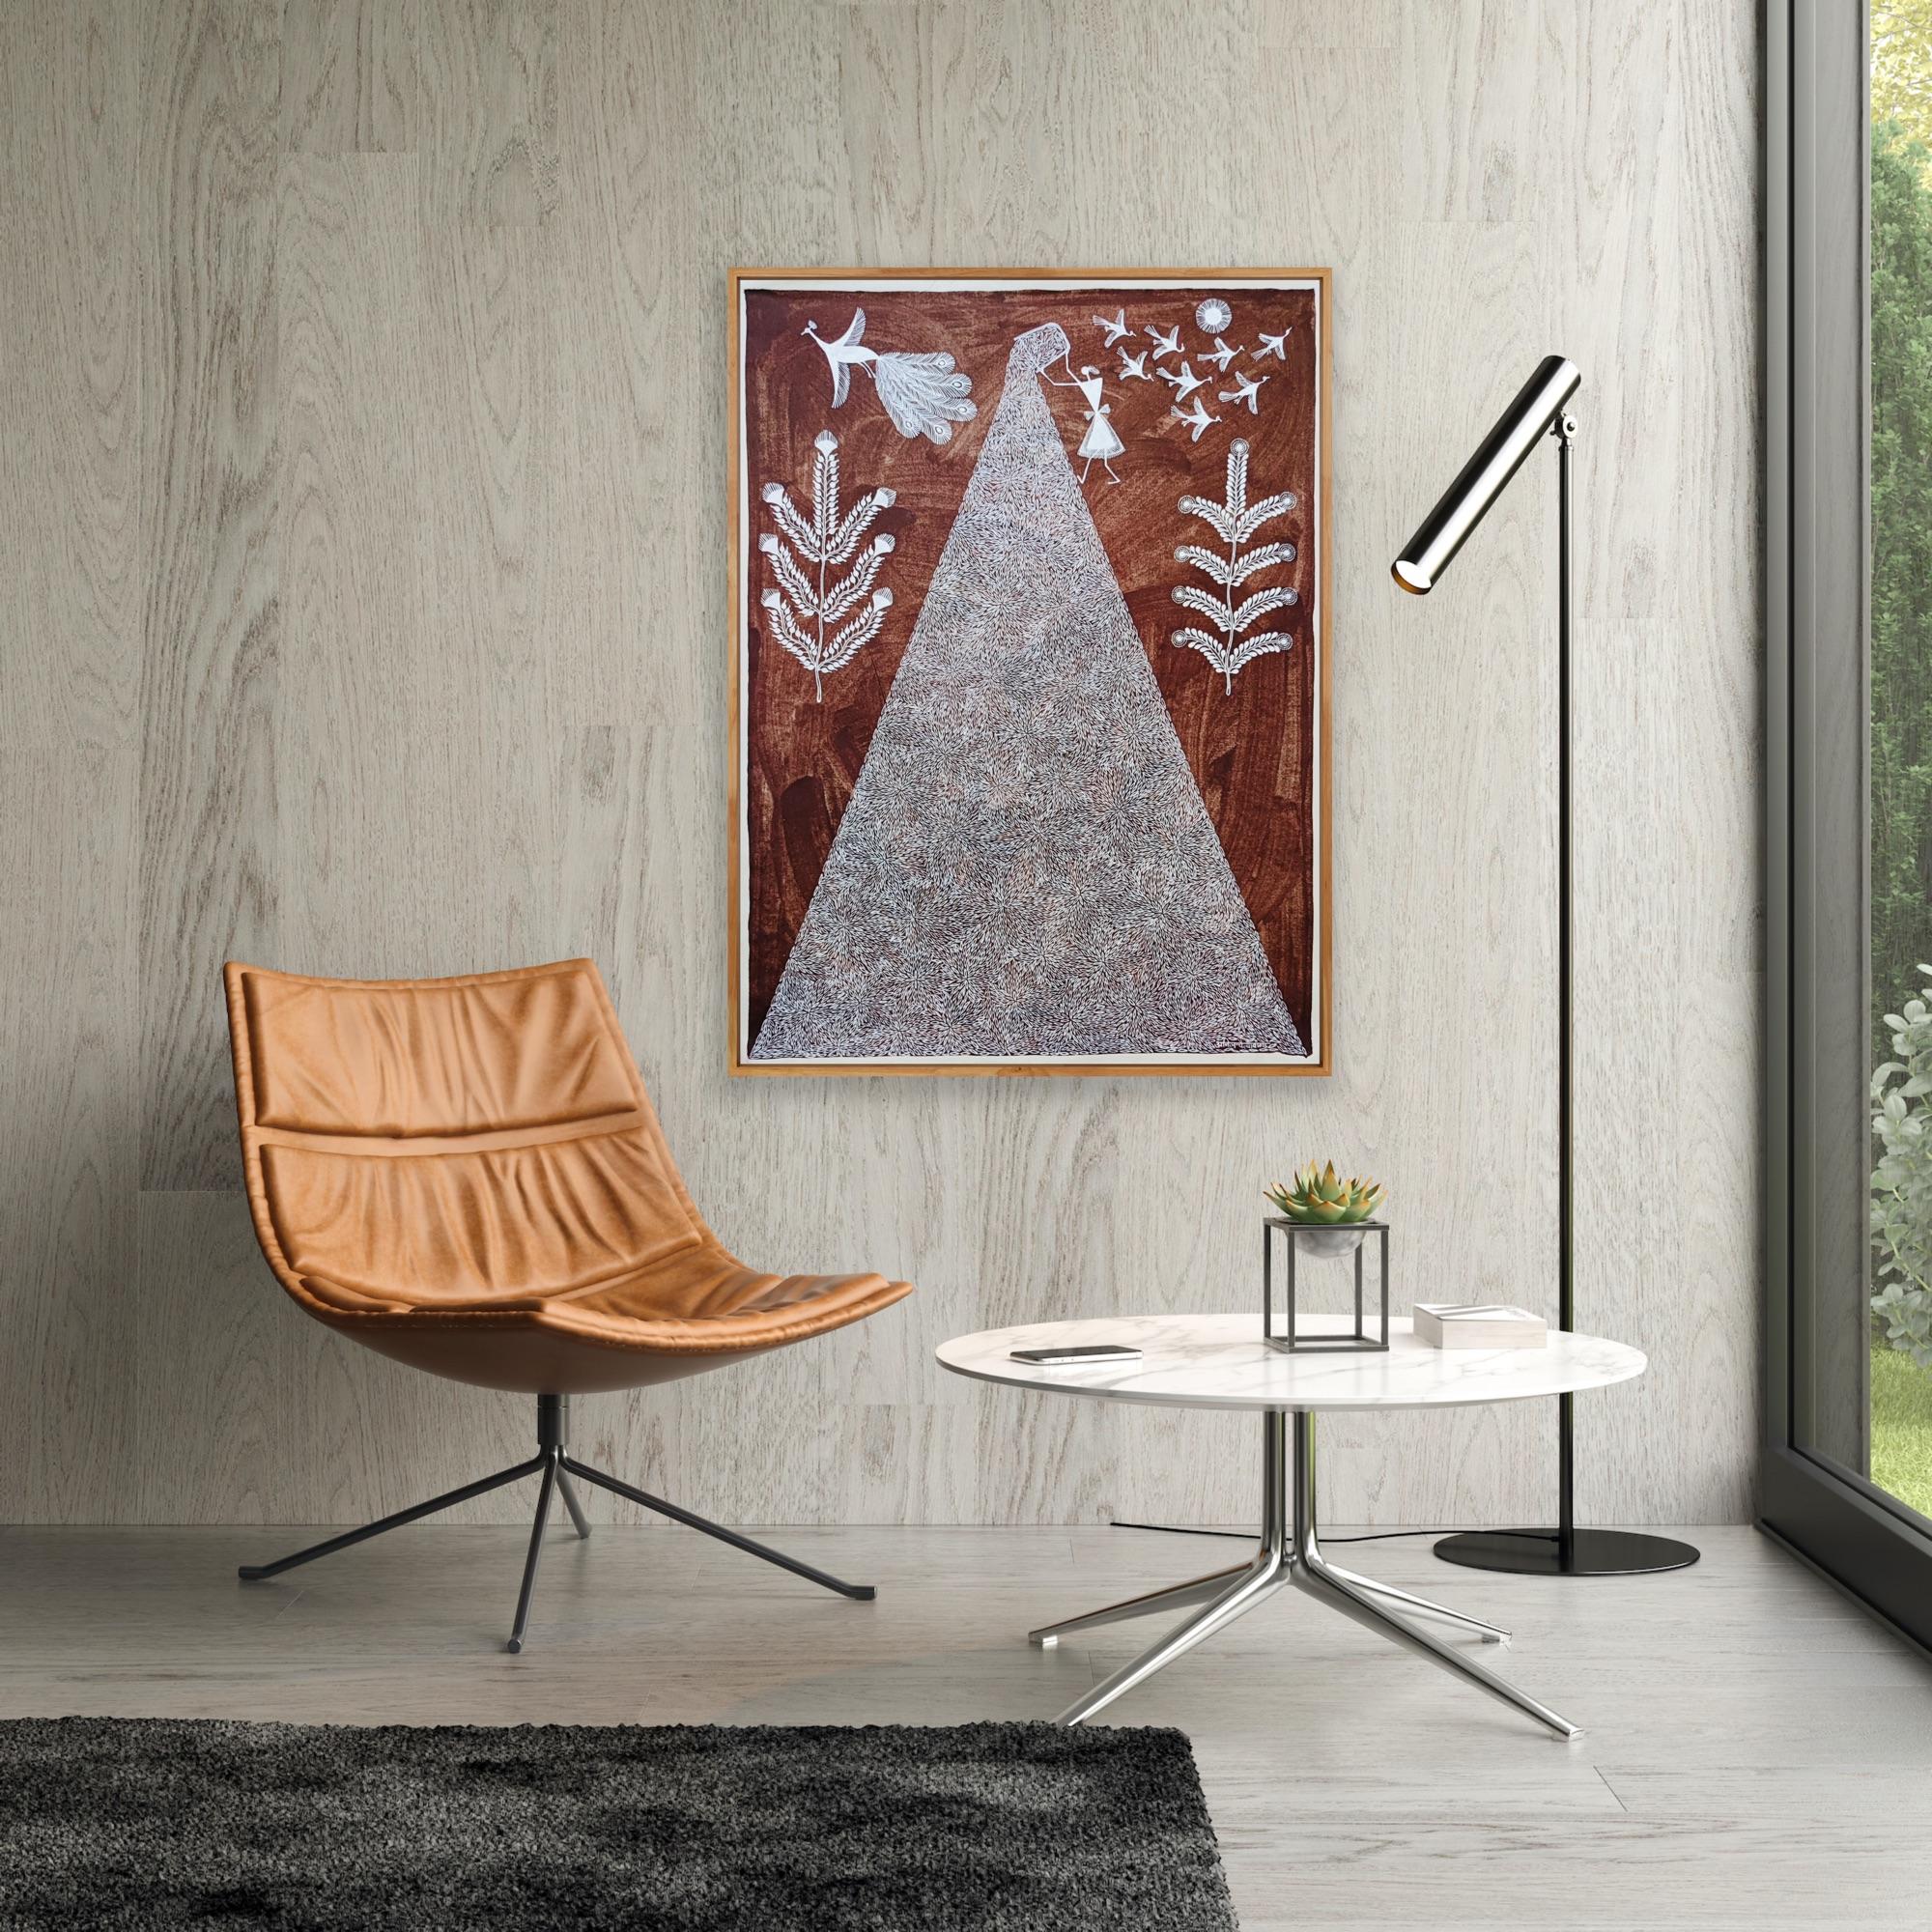 Animal Tribal Painting on Canvas India Natural Mud Minimal Brown White Triangle For Sale 12